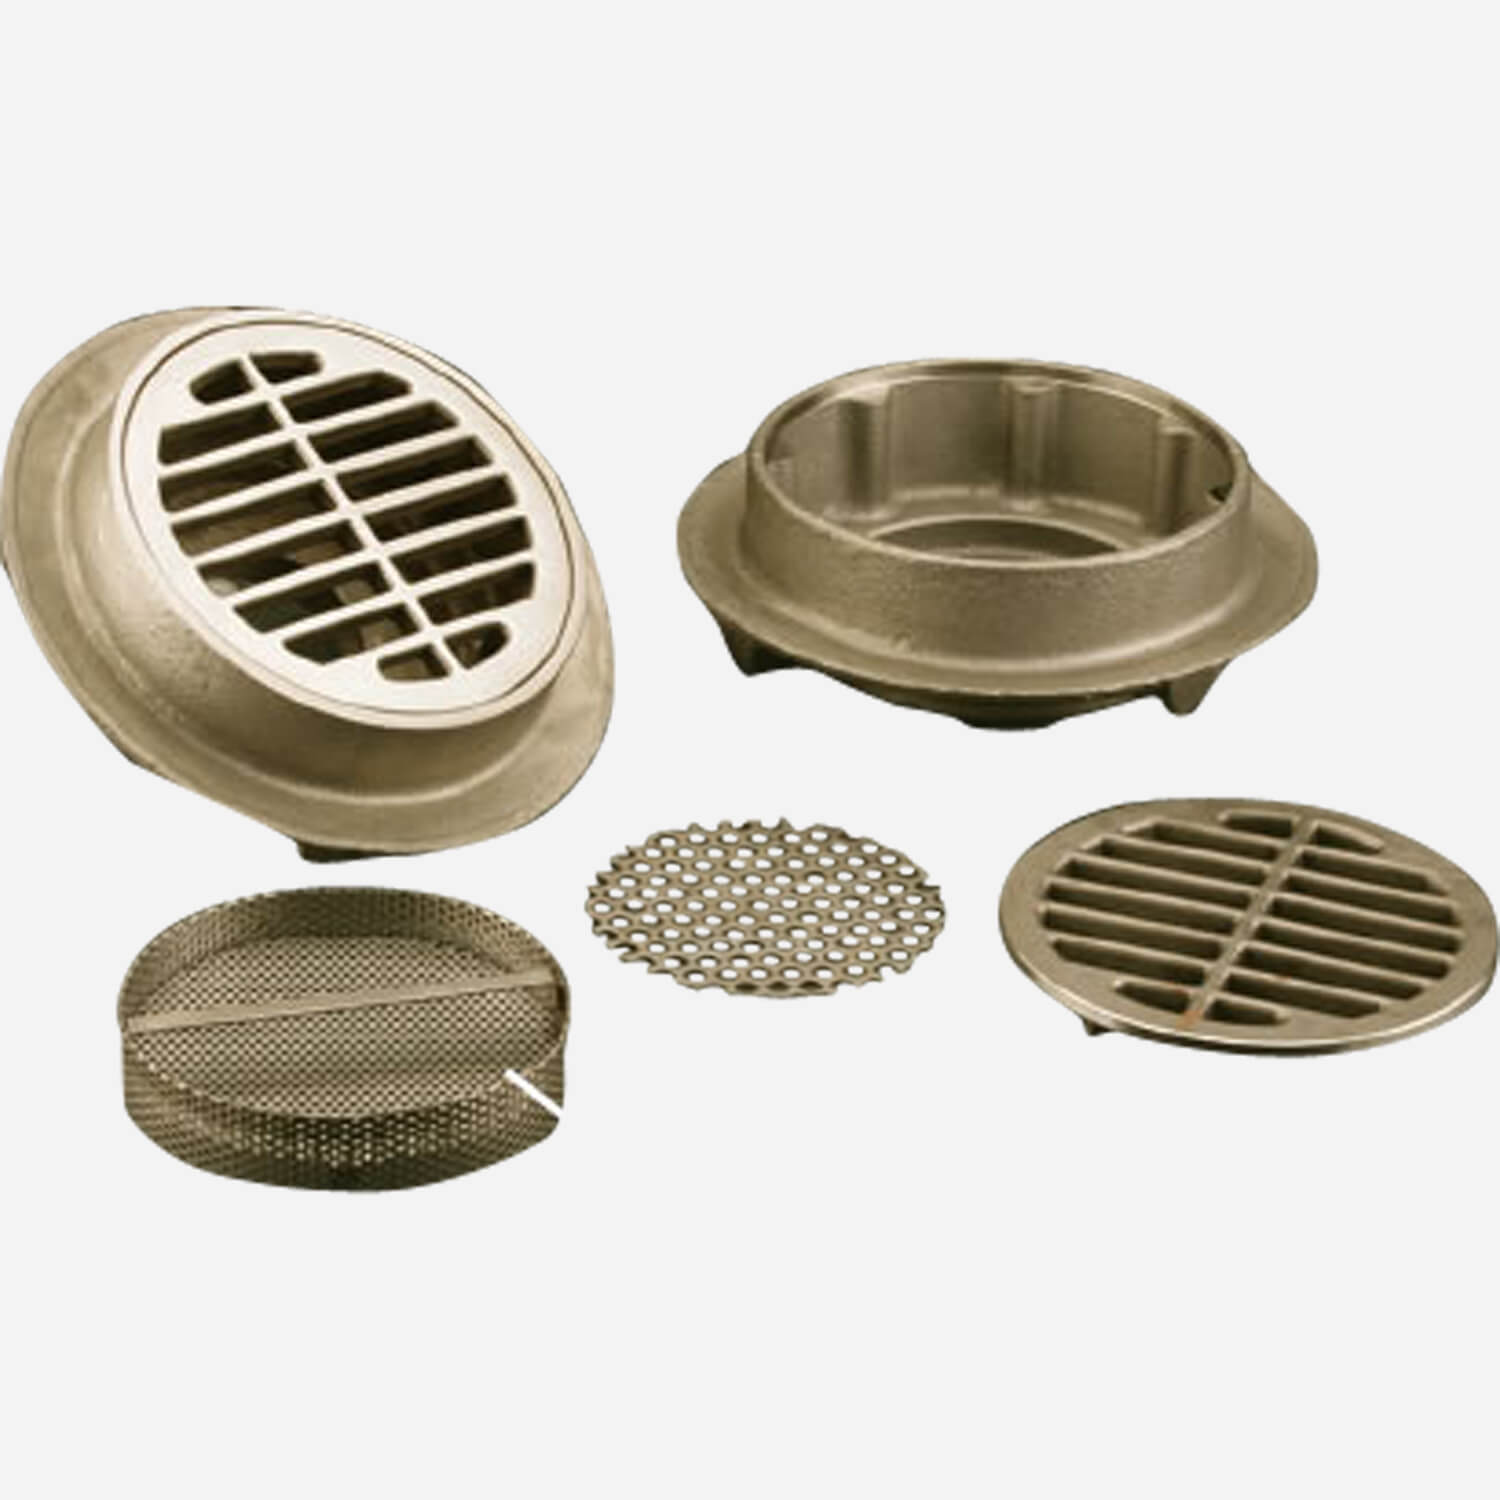 Stainless Steel Floor Drain Covers Options